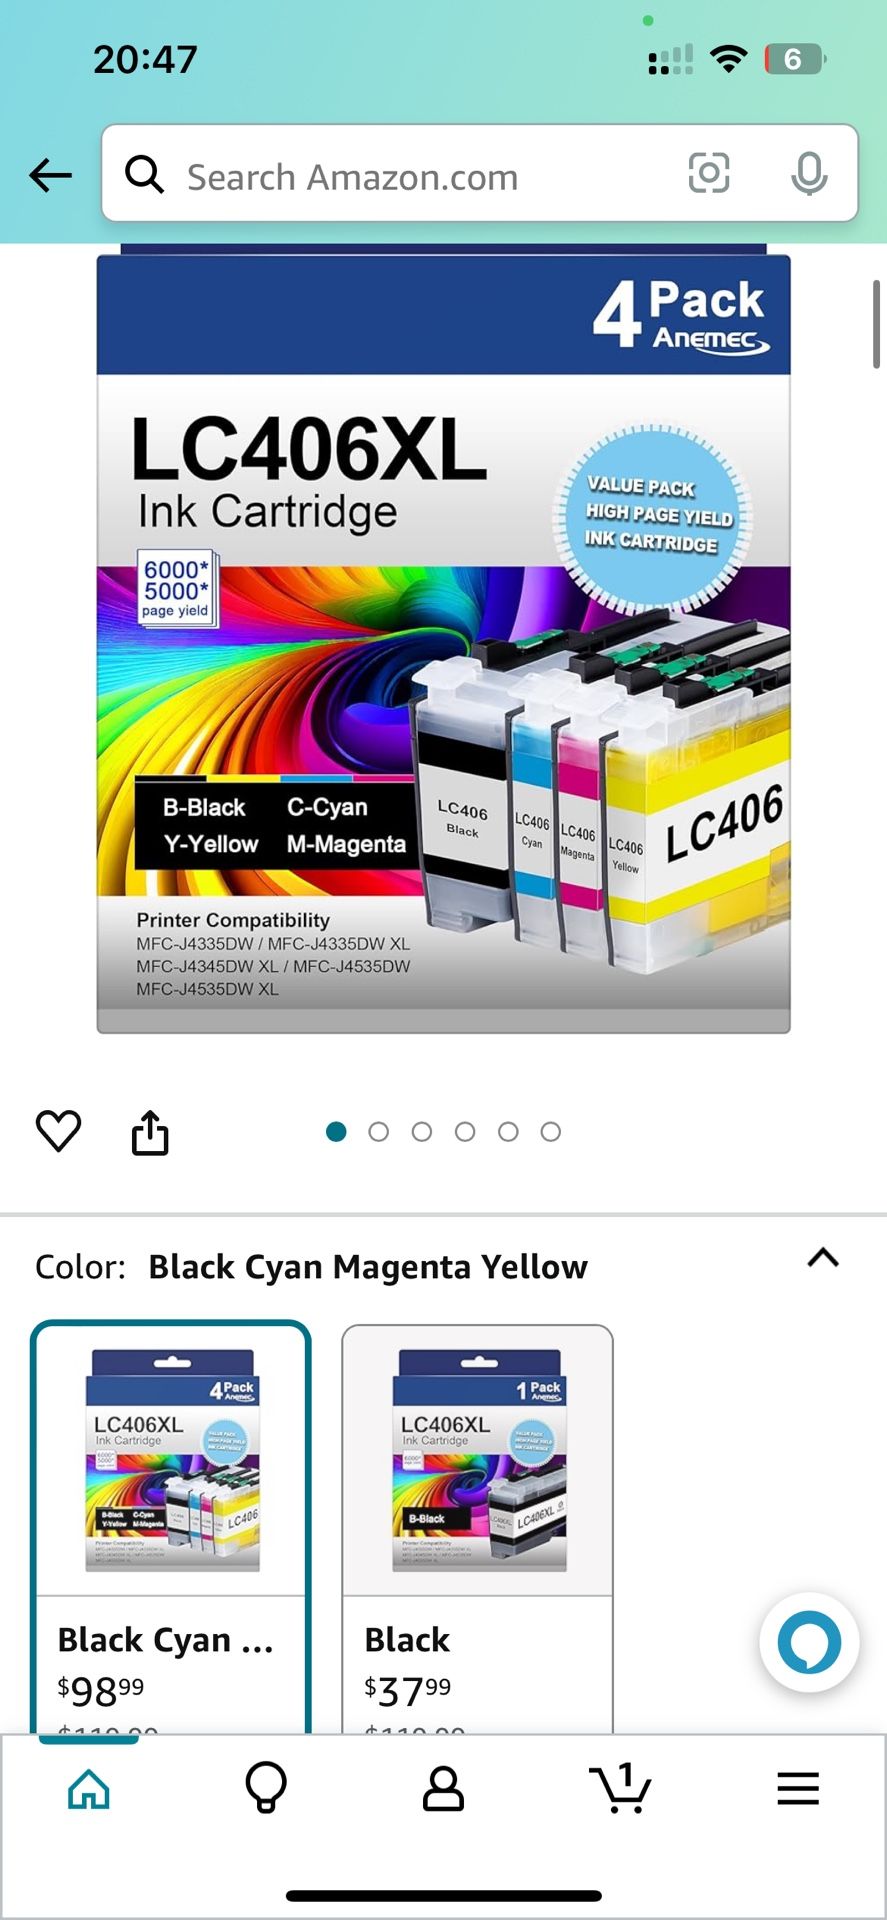 LC406XL LC406 Ink Cartridges for Brother Printer Compatible with Brother MFC-J4335DW Ink Work for MFC-J5855DW MFC-J6555DW MFC-J4535DW Printers (Black 